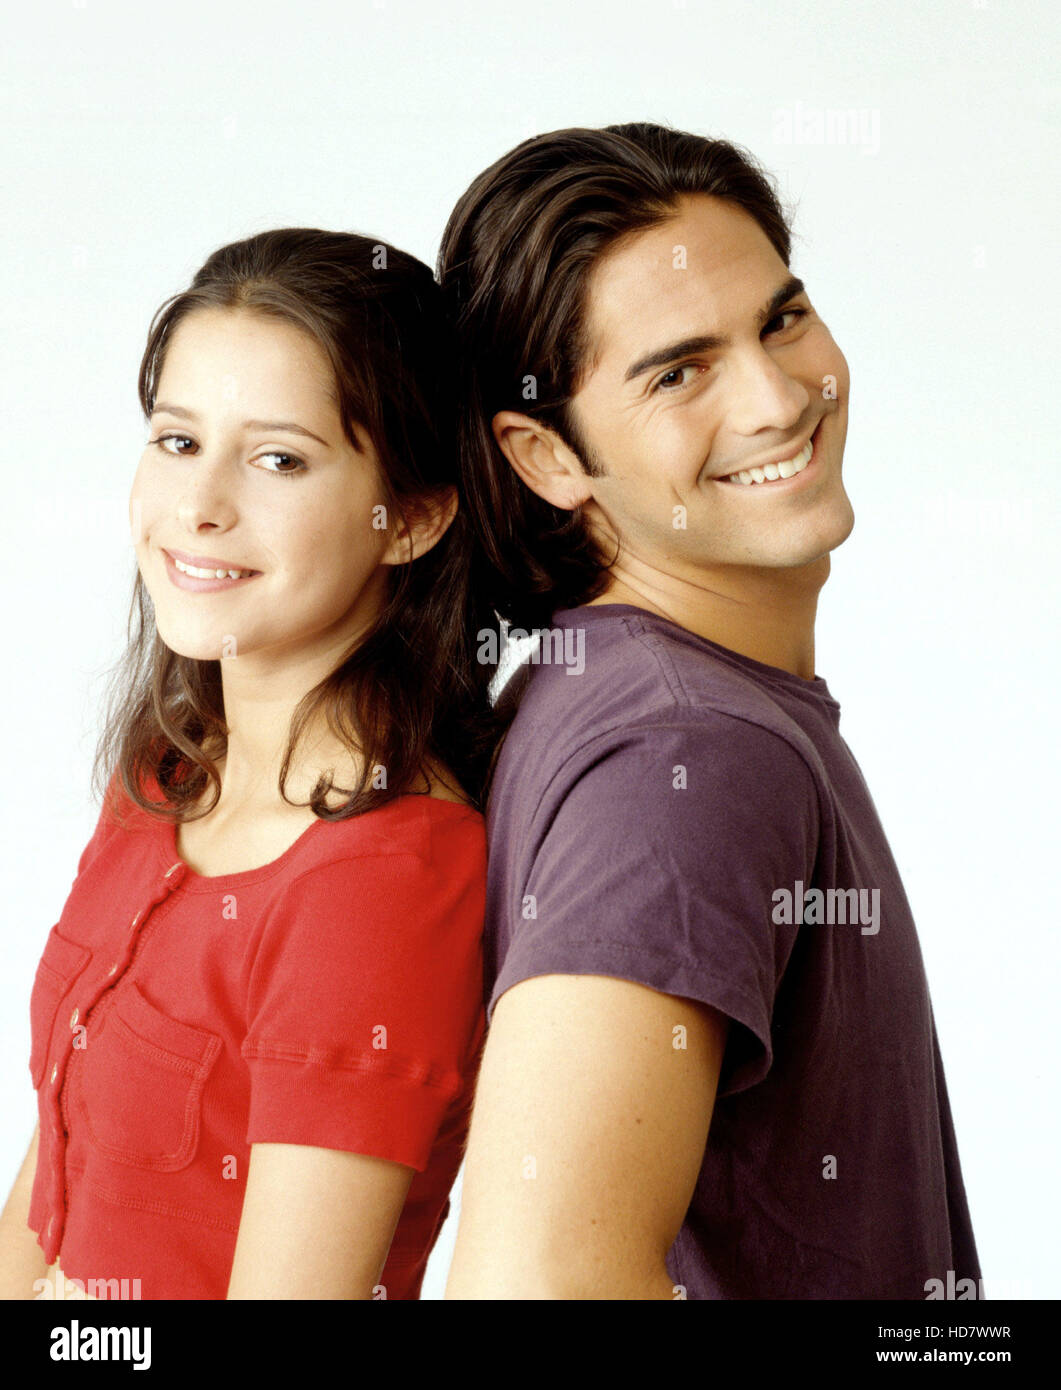 GENERAL HOSPITAL, Kimberly McCullough, Michael Sutton, (1994), 1963-present, (c)ABC/courtesy Everett Collection Stock Photo